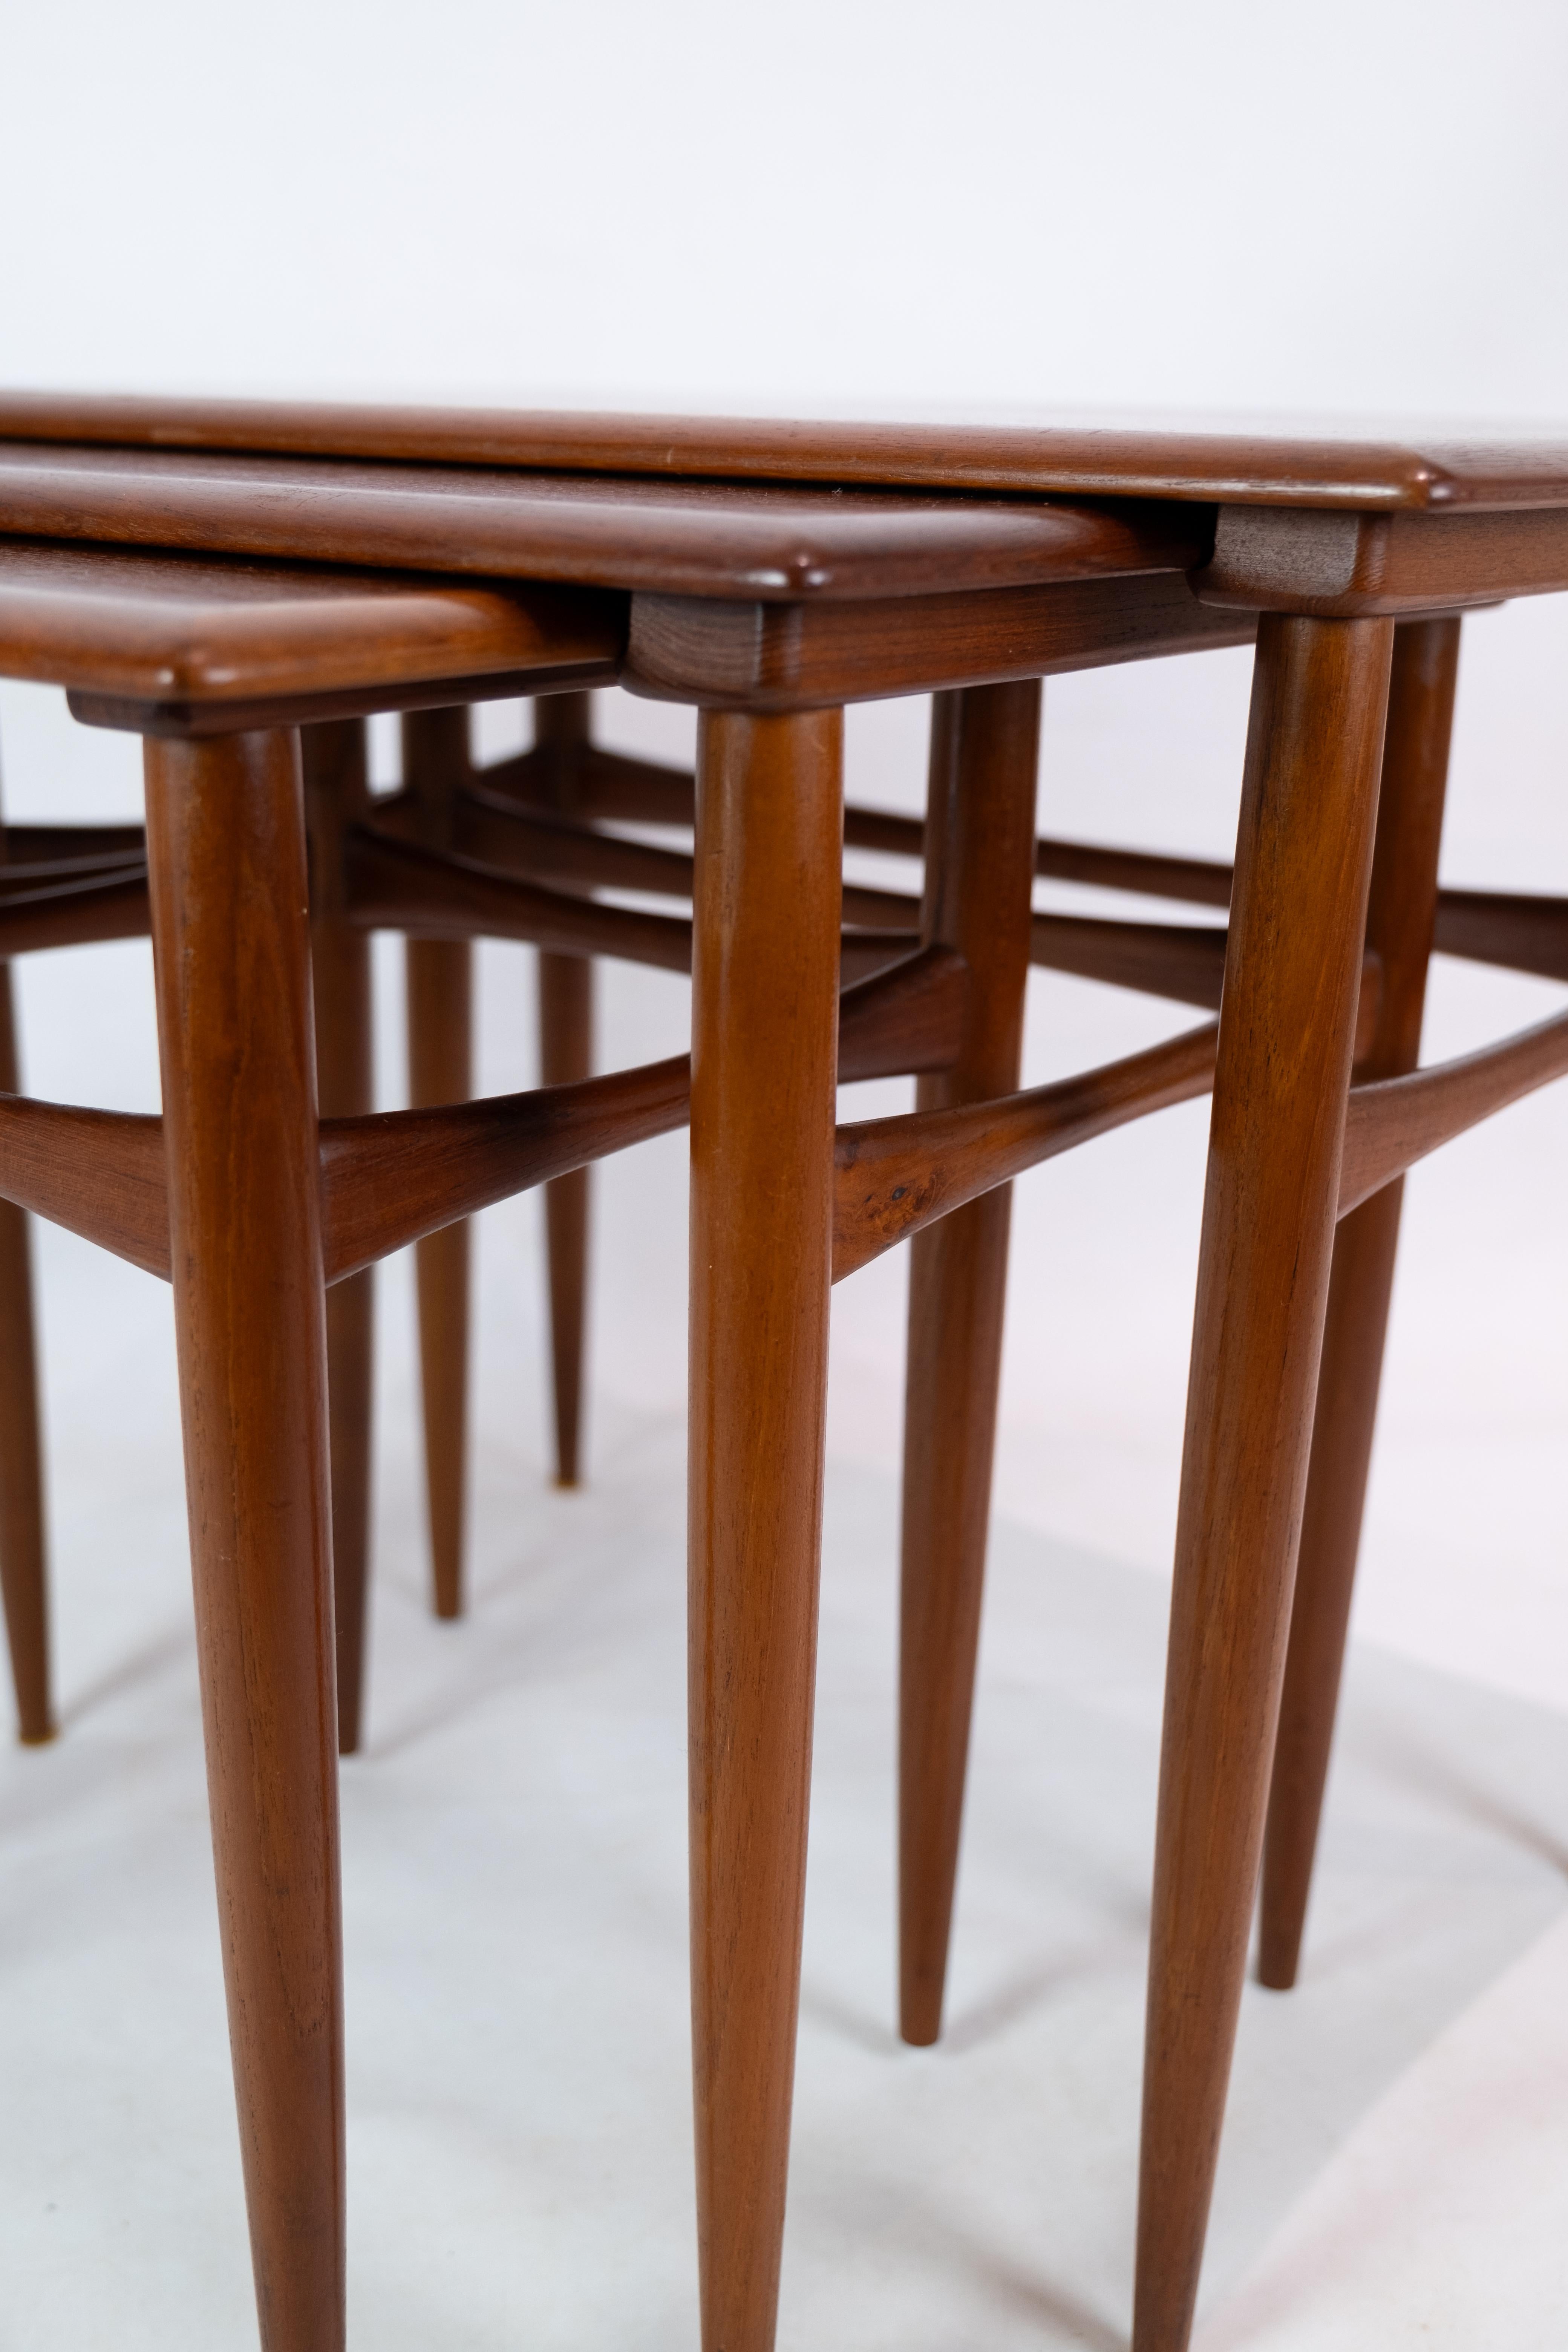 Mid-20th Century Nesting Tables / Stacking Tables of Danish Design in Teak Wood From The 1960's  For Sale